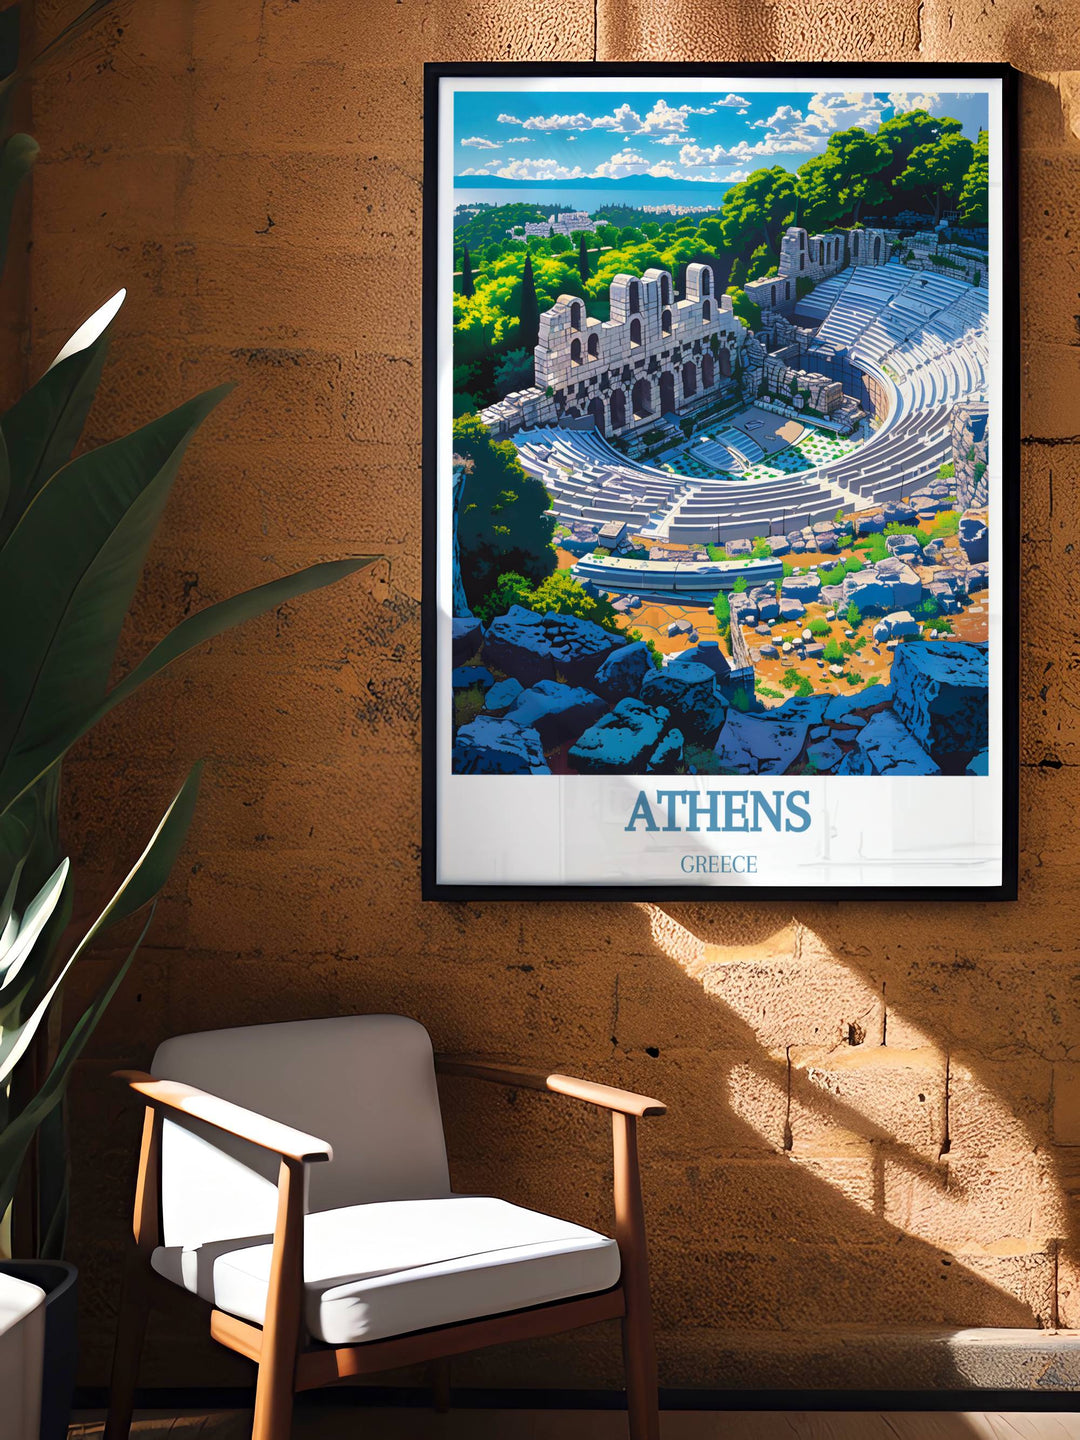 The Acropolis seen through the olive groves, combining natural and historical beauty in a unique and stunning print.